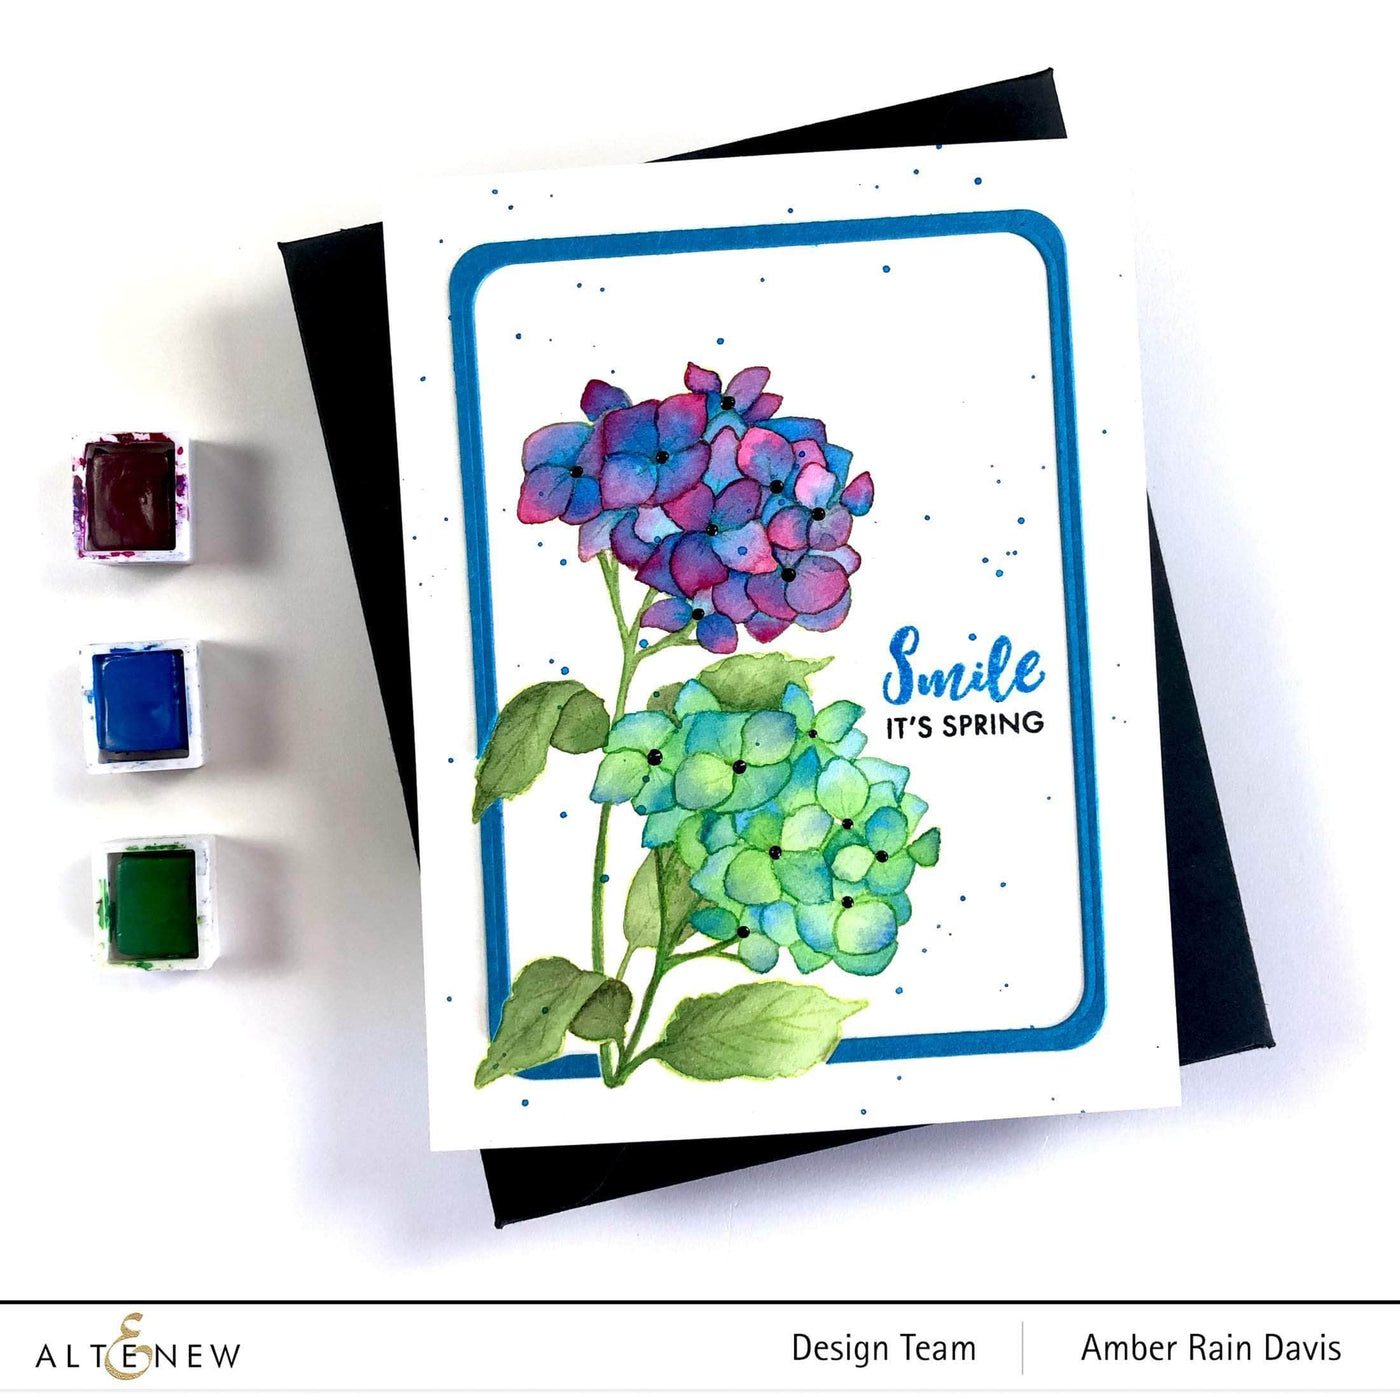 Hydrangea Stamp - Simply Stamps